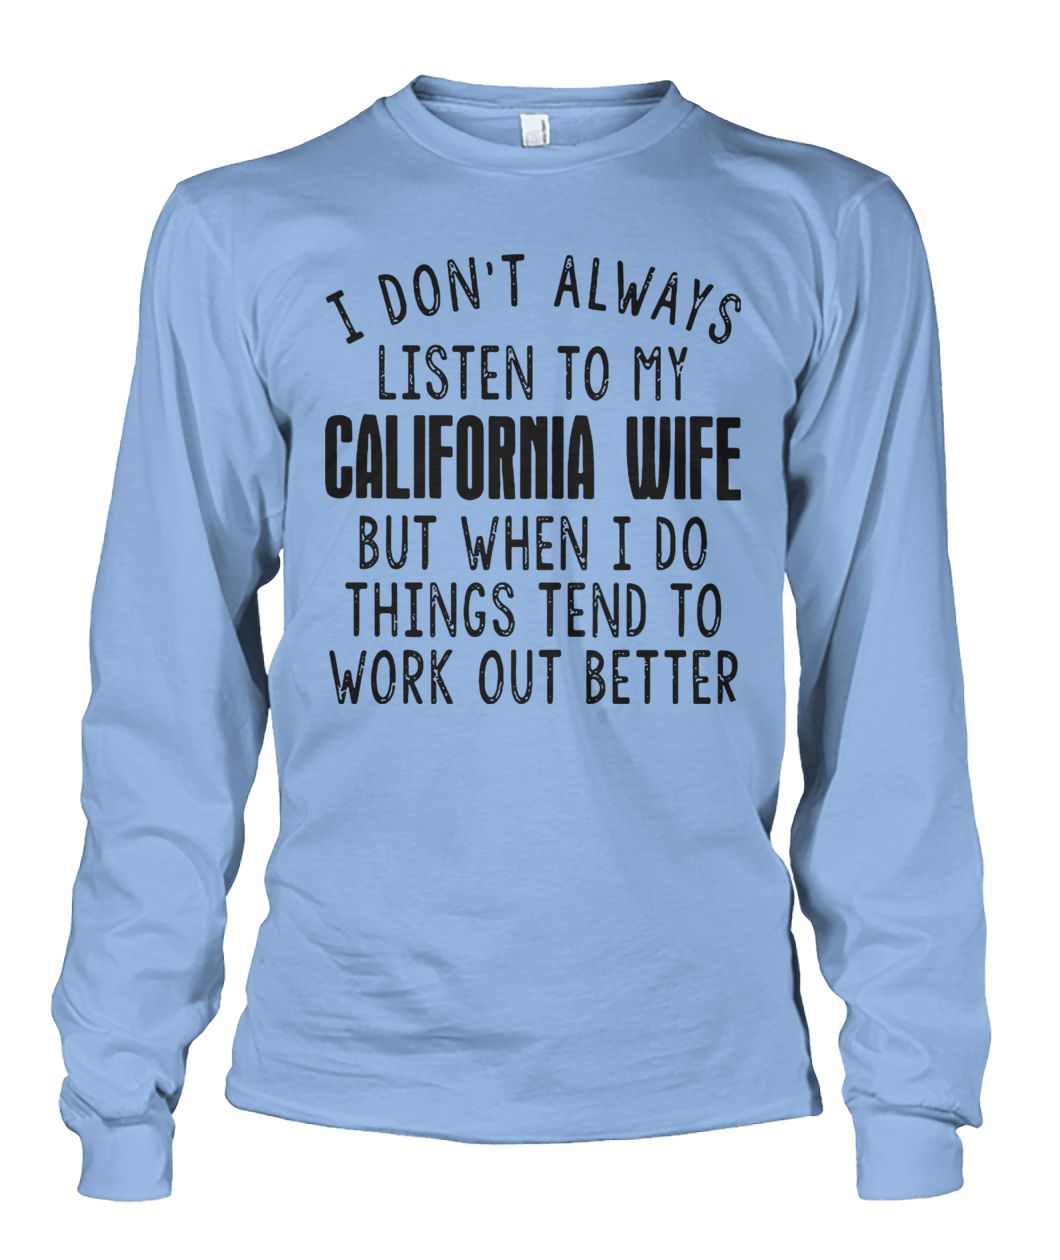 I don’t always listen to my california wife but when I do things tend to work out better unisex long sleeve